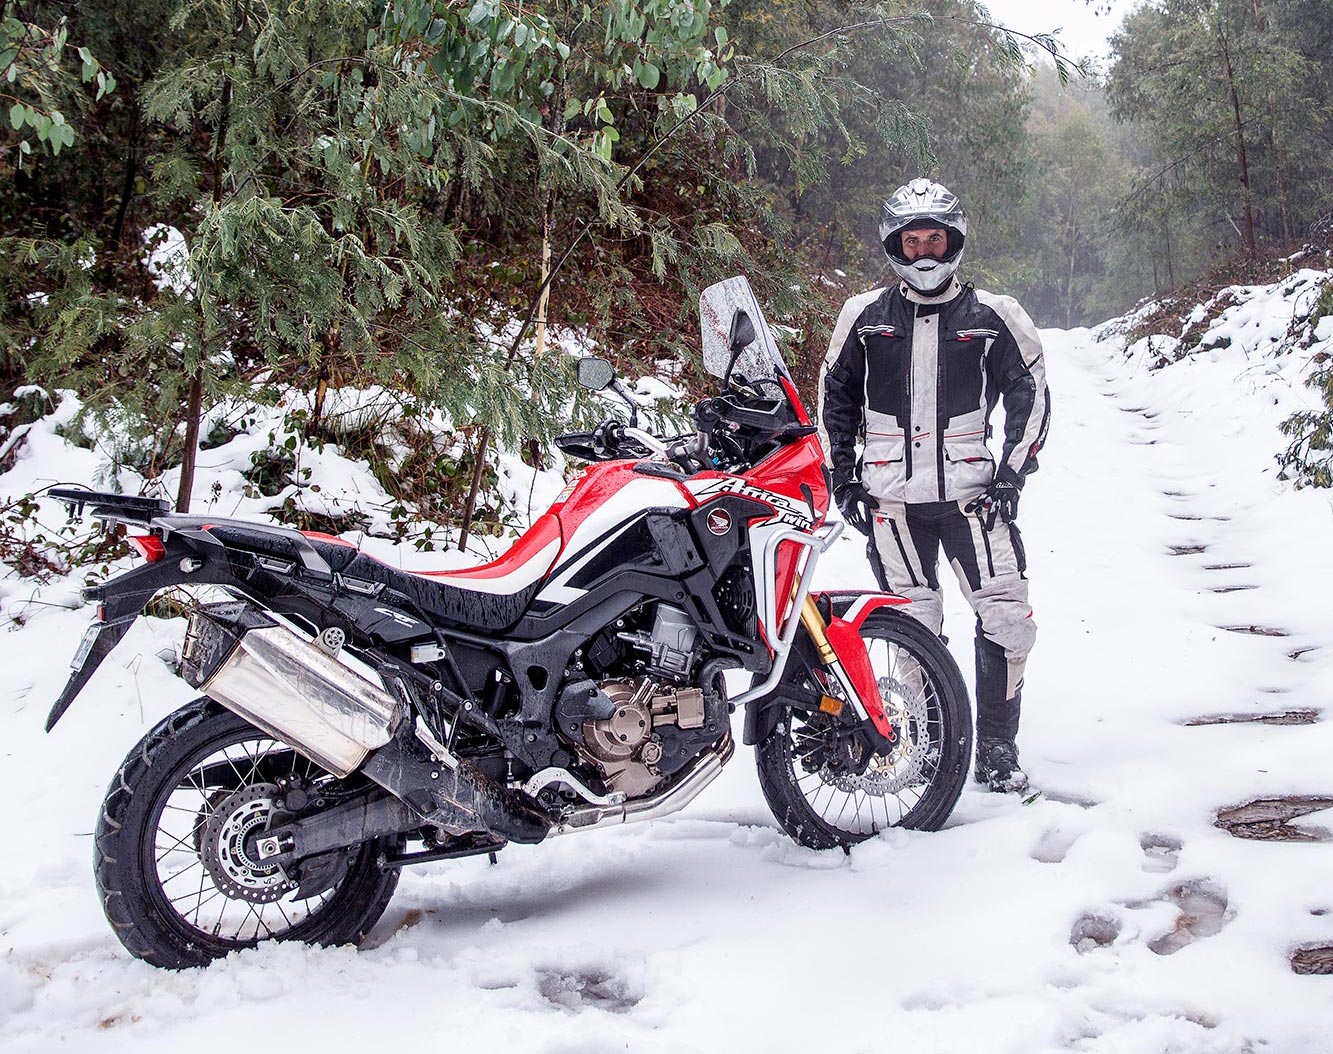 Winter Warmers How to stay warm riding in winter